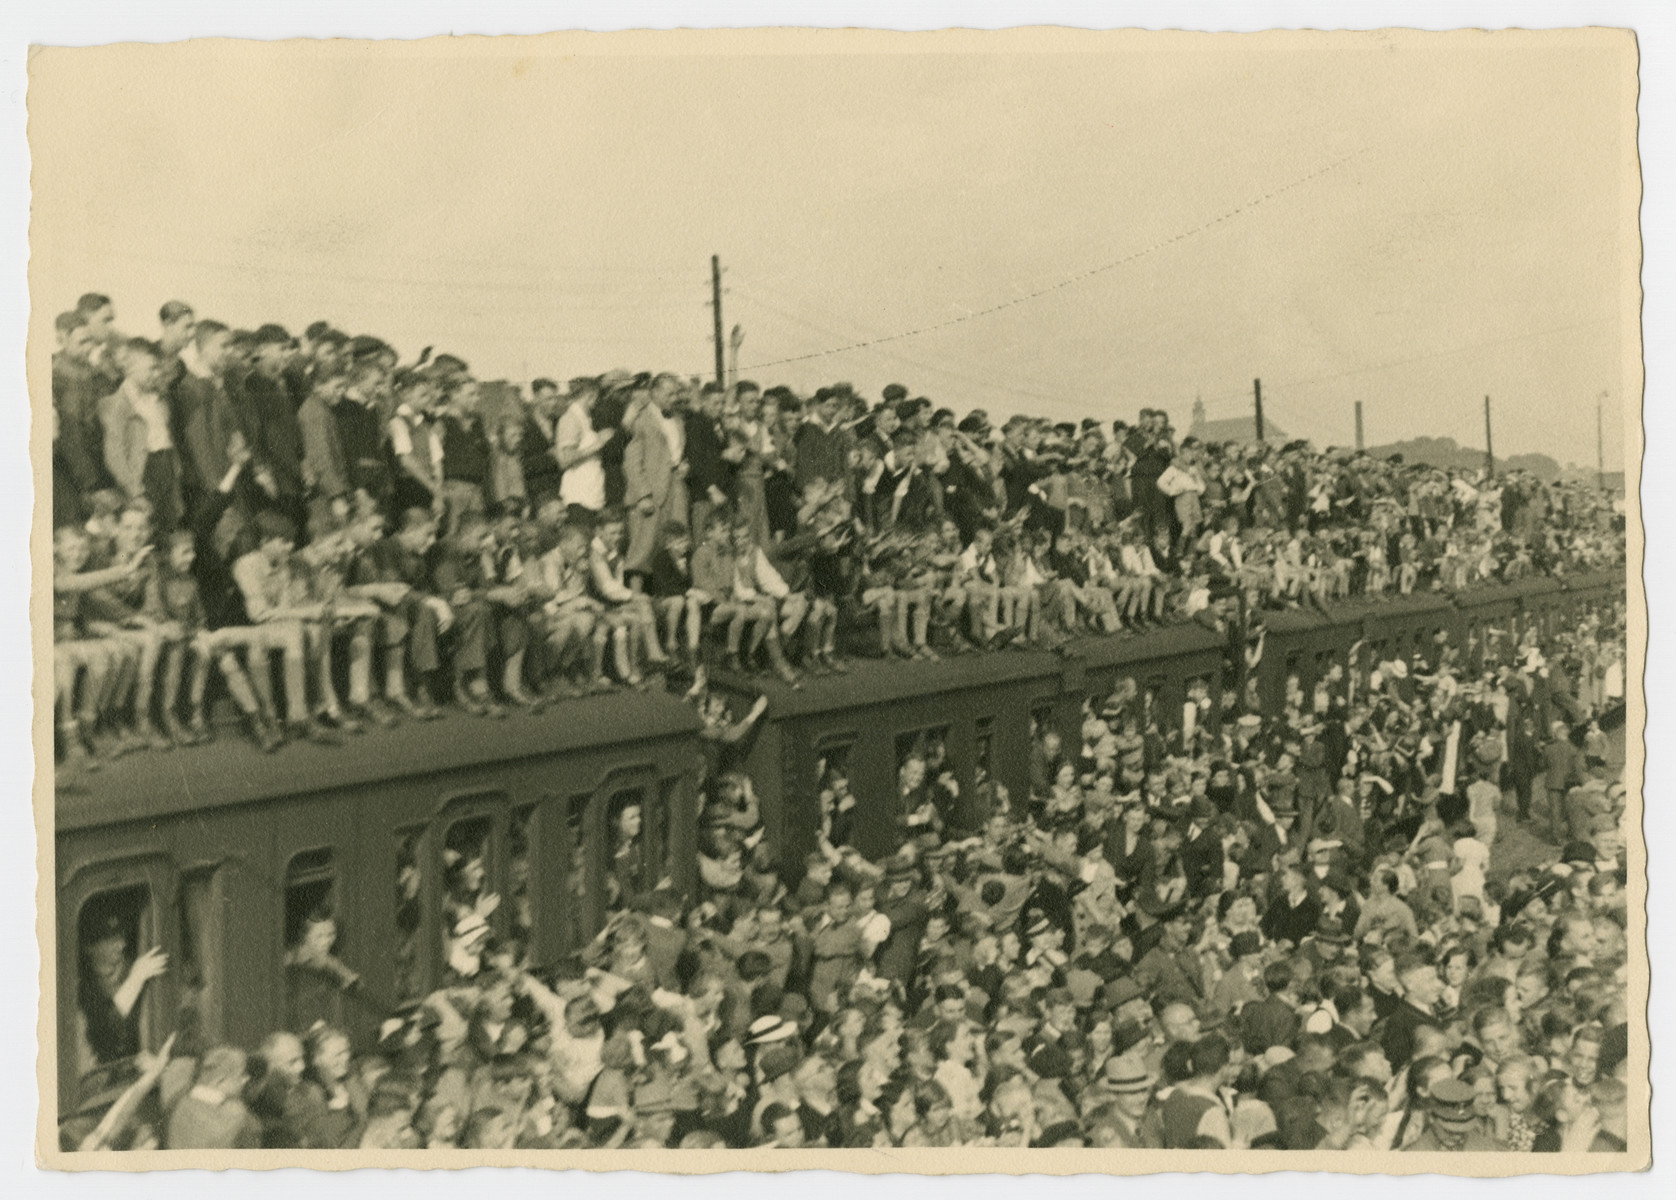 Crowds of people gather in front of and on top of a train to participate in a May Day Nazi party parade.